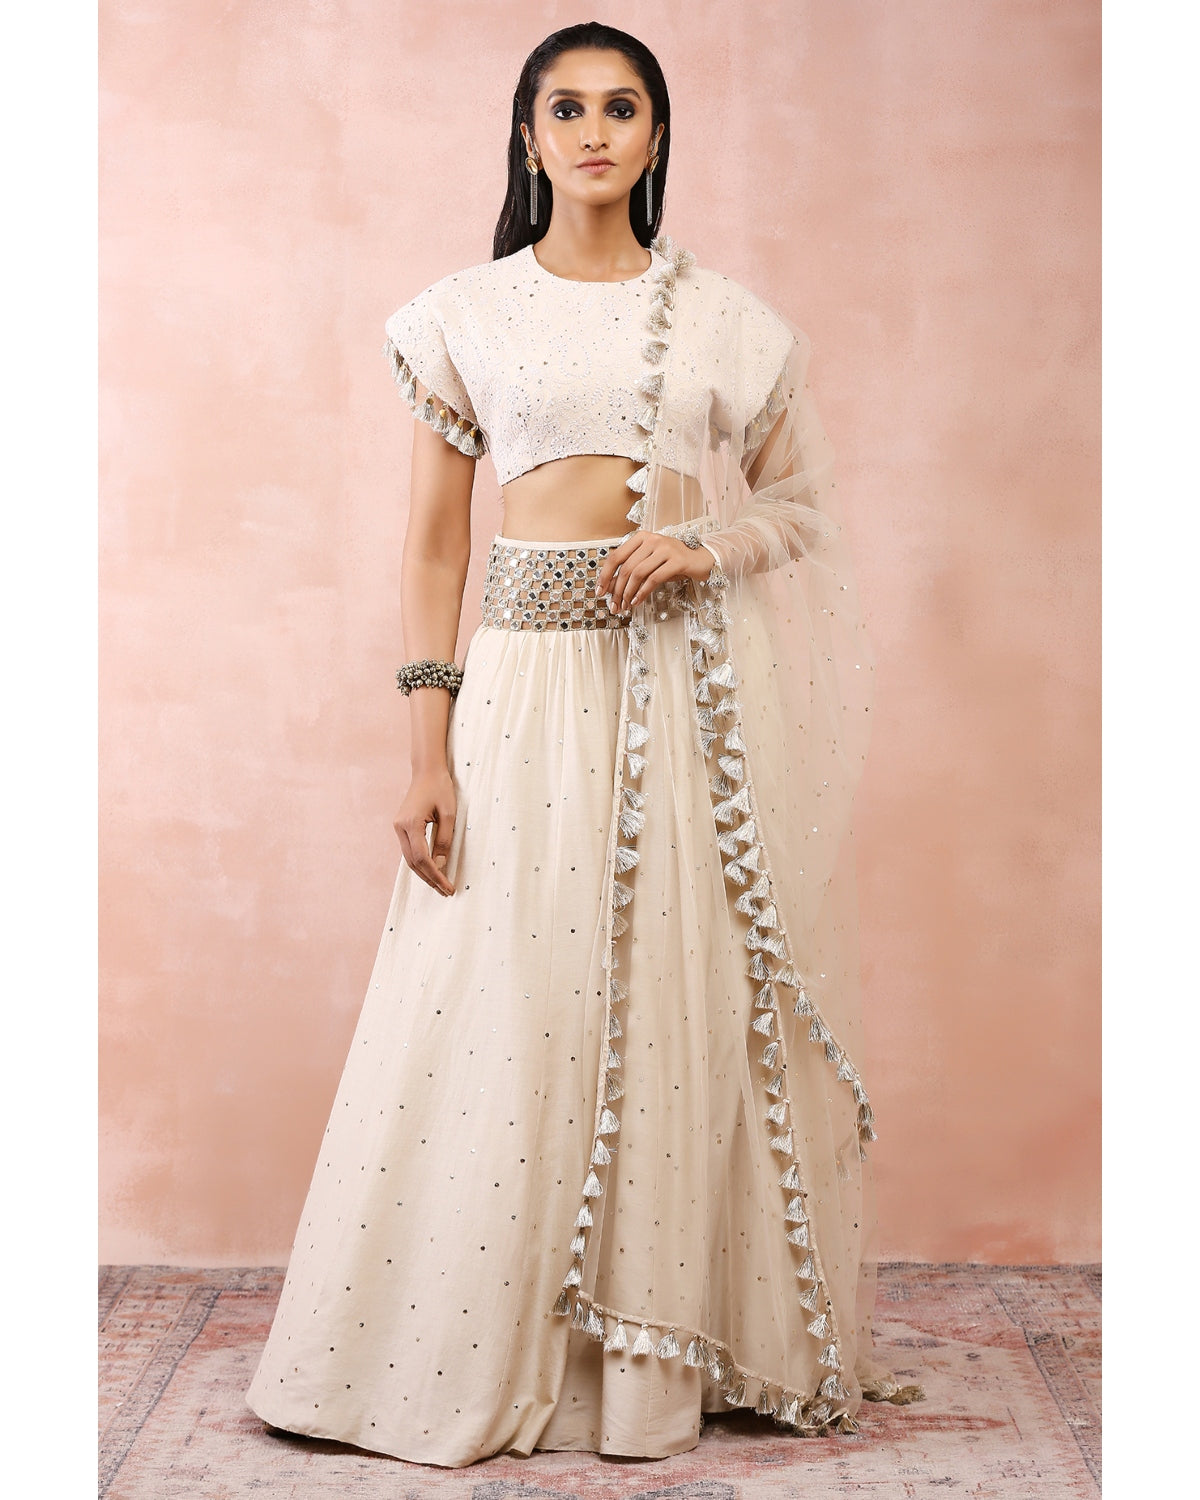 Cream Top With Embroidered Belt Lehenga And Dupatta by Payal Singhal